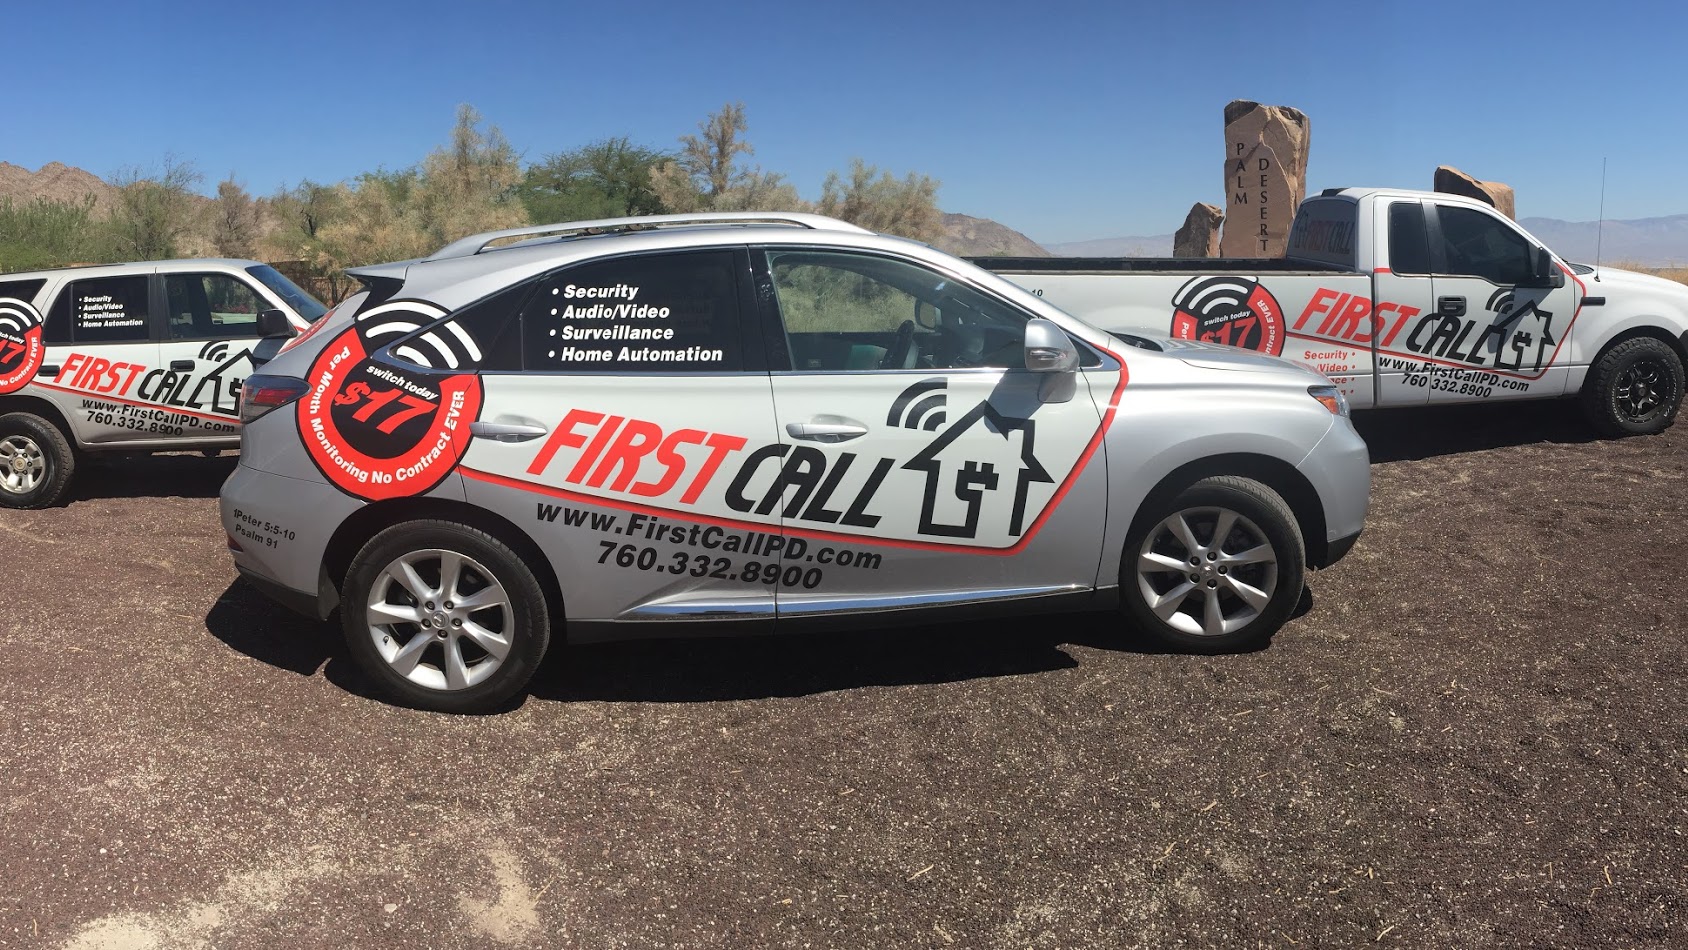 First Call Security and Sound LLC